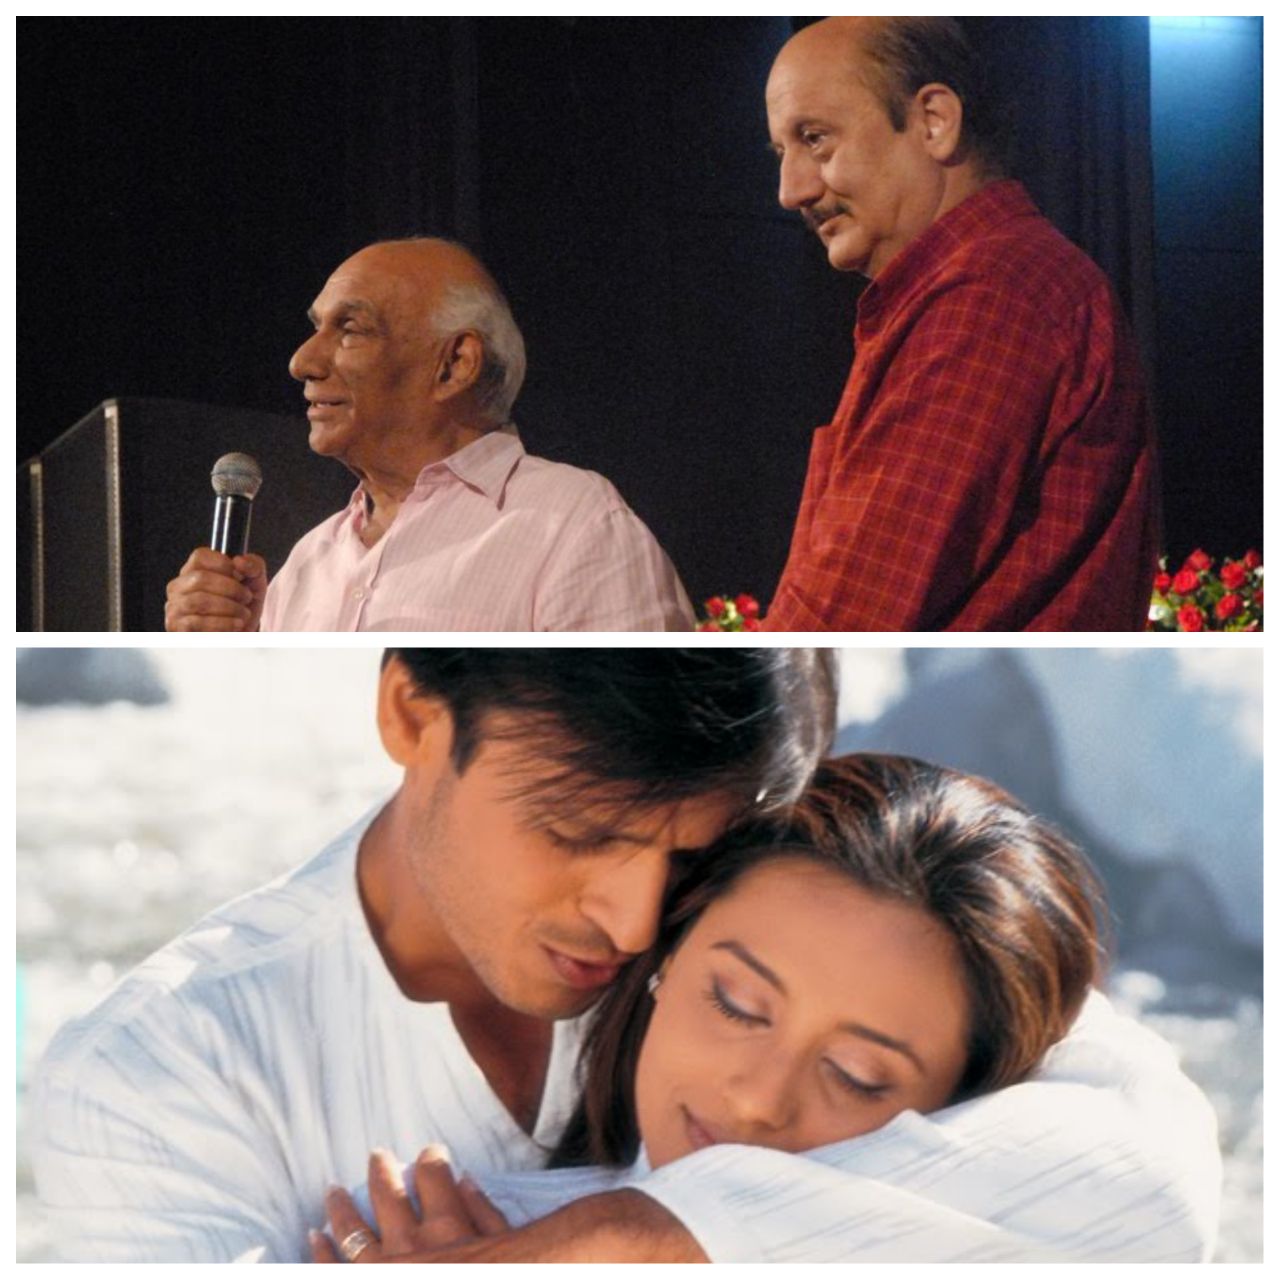 EXCLUSIVE: Vivek Oberoi and Anupam Kher fondly remember Yash Chopra on his birth anniversary